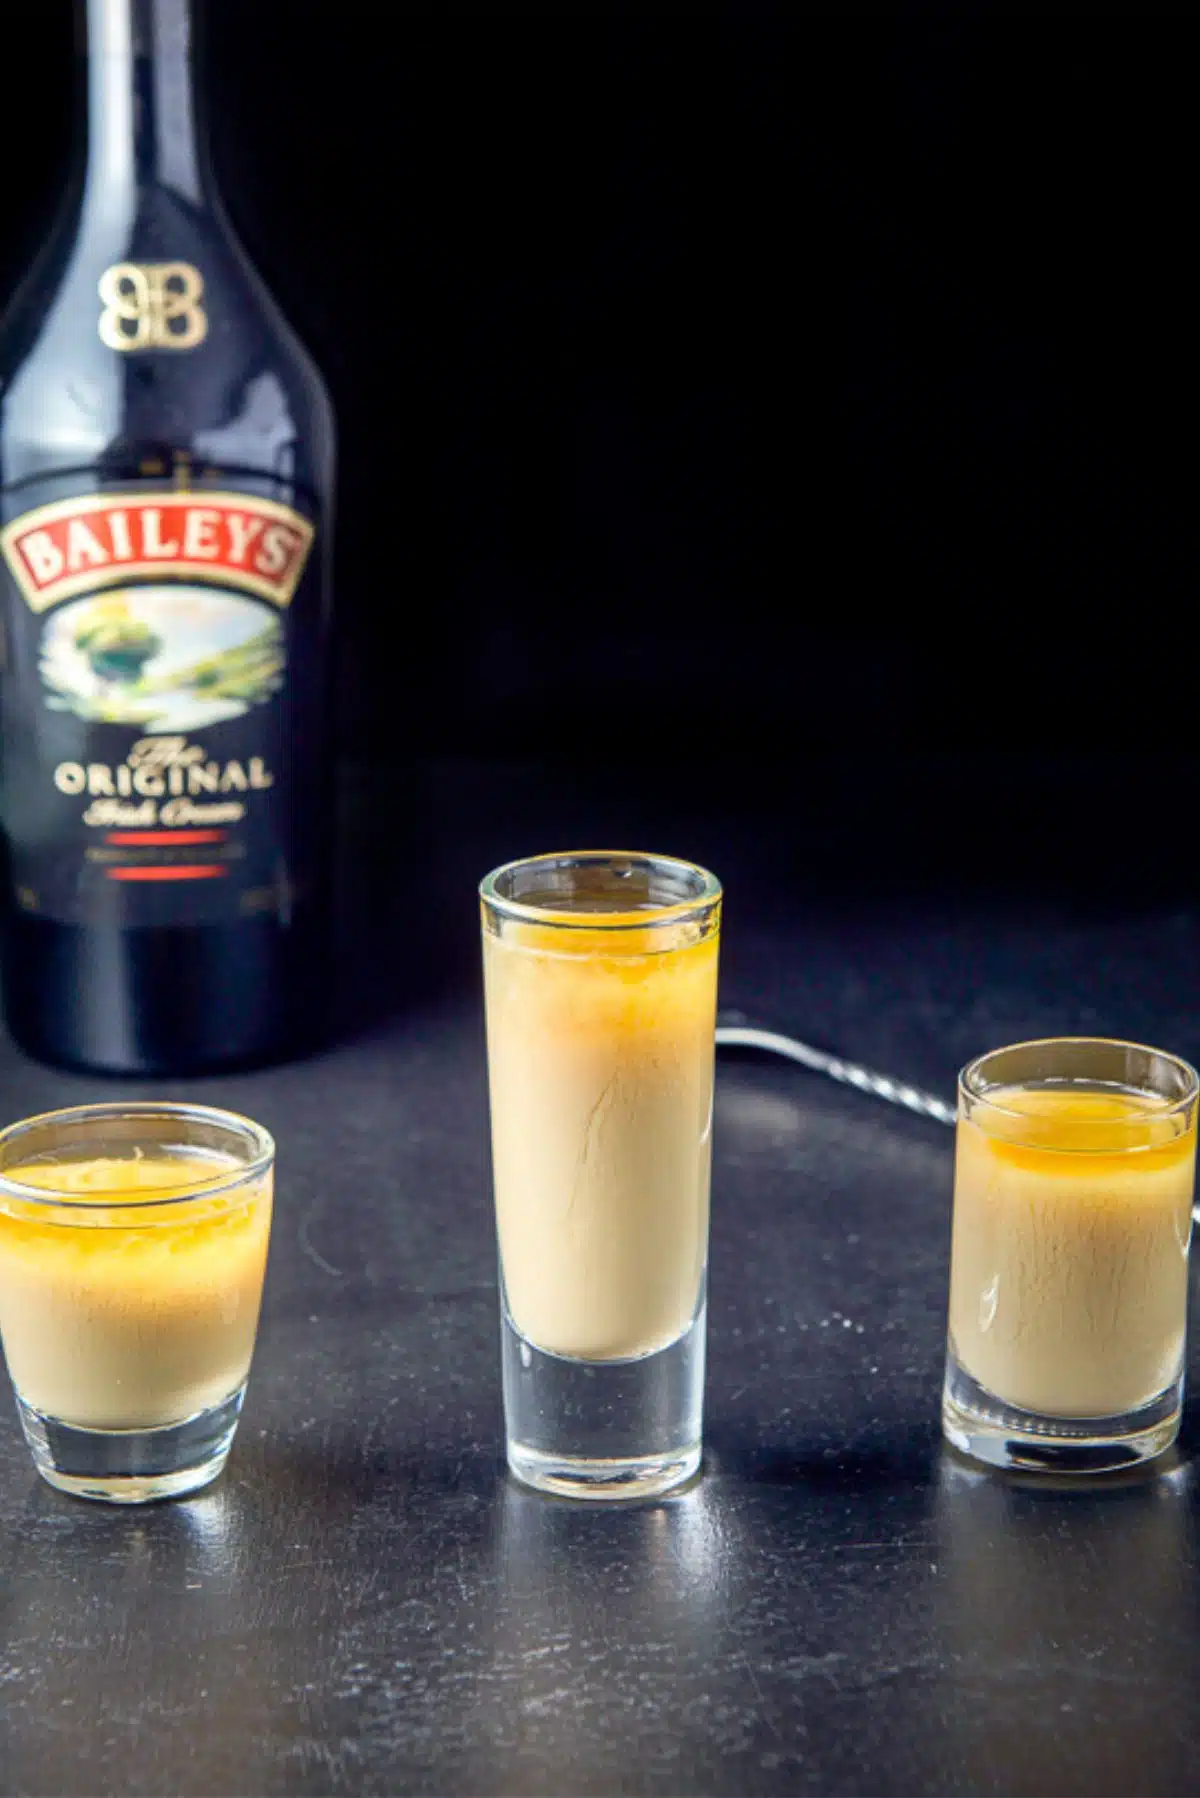 Irish cream layered into the glasses with the spoon and bottle in the background